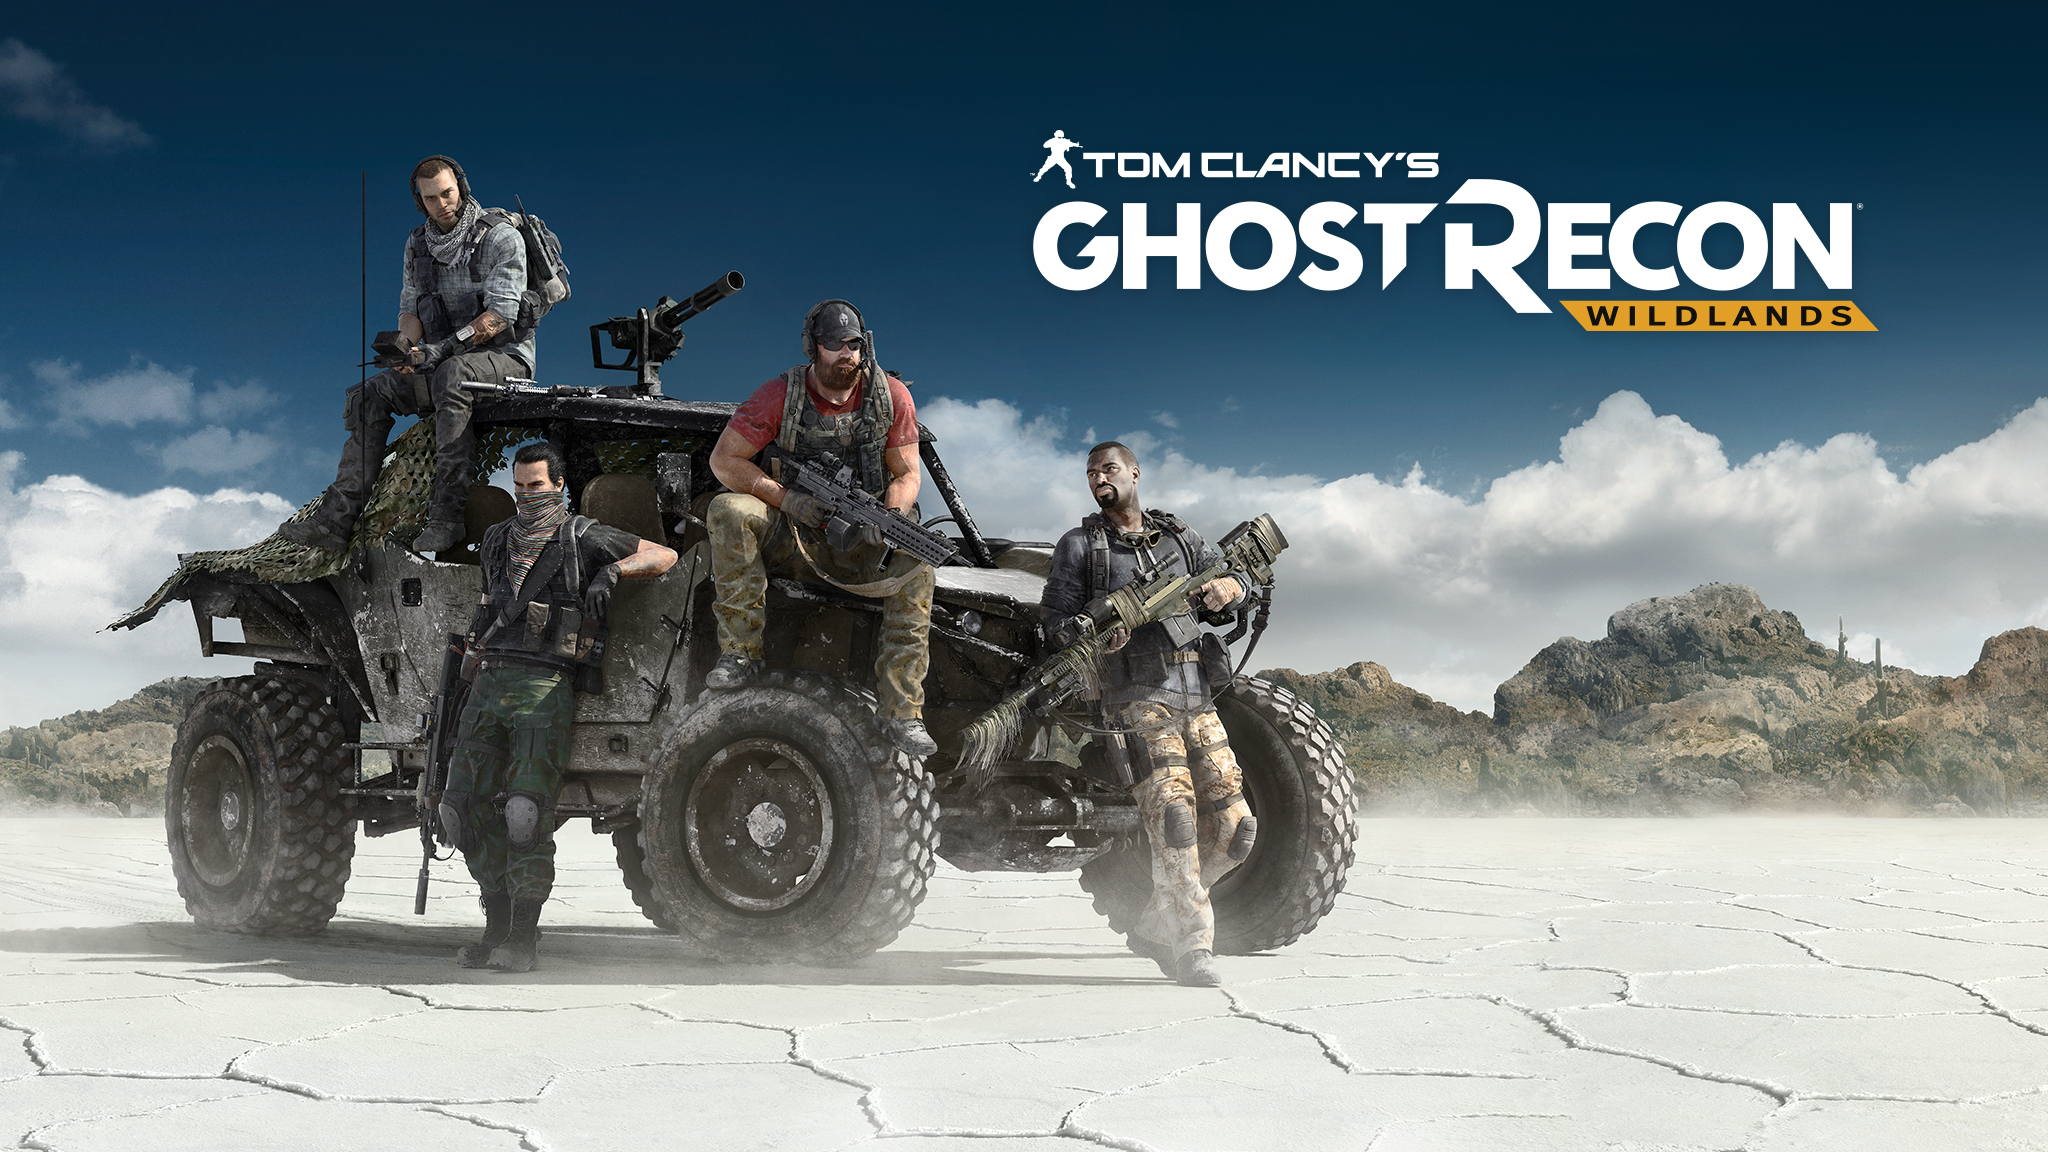 [NEWS] BOOM Library SFX used in Tom Clancy’s: Ghost Recon Wildlands TV SPOT "Ruthless"